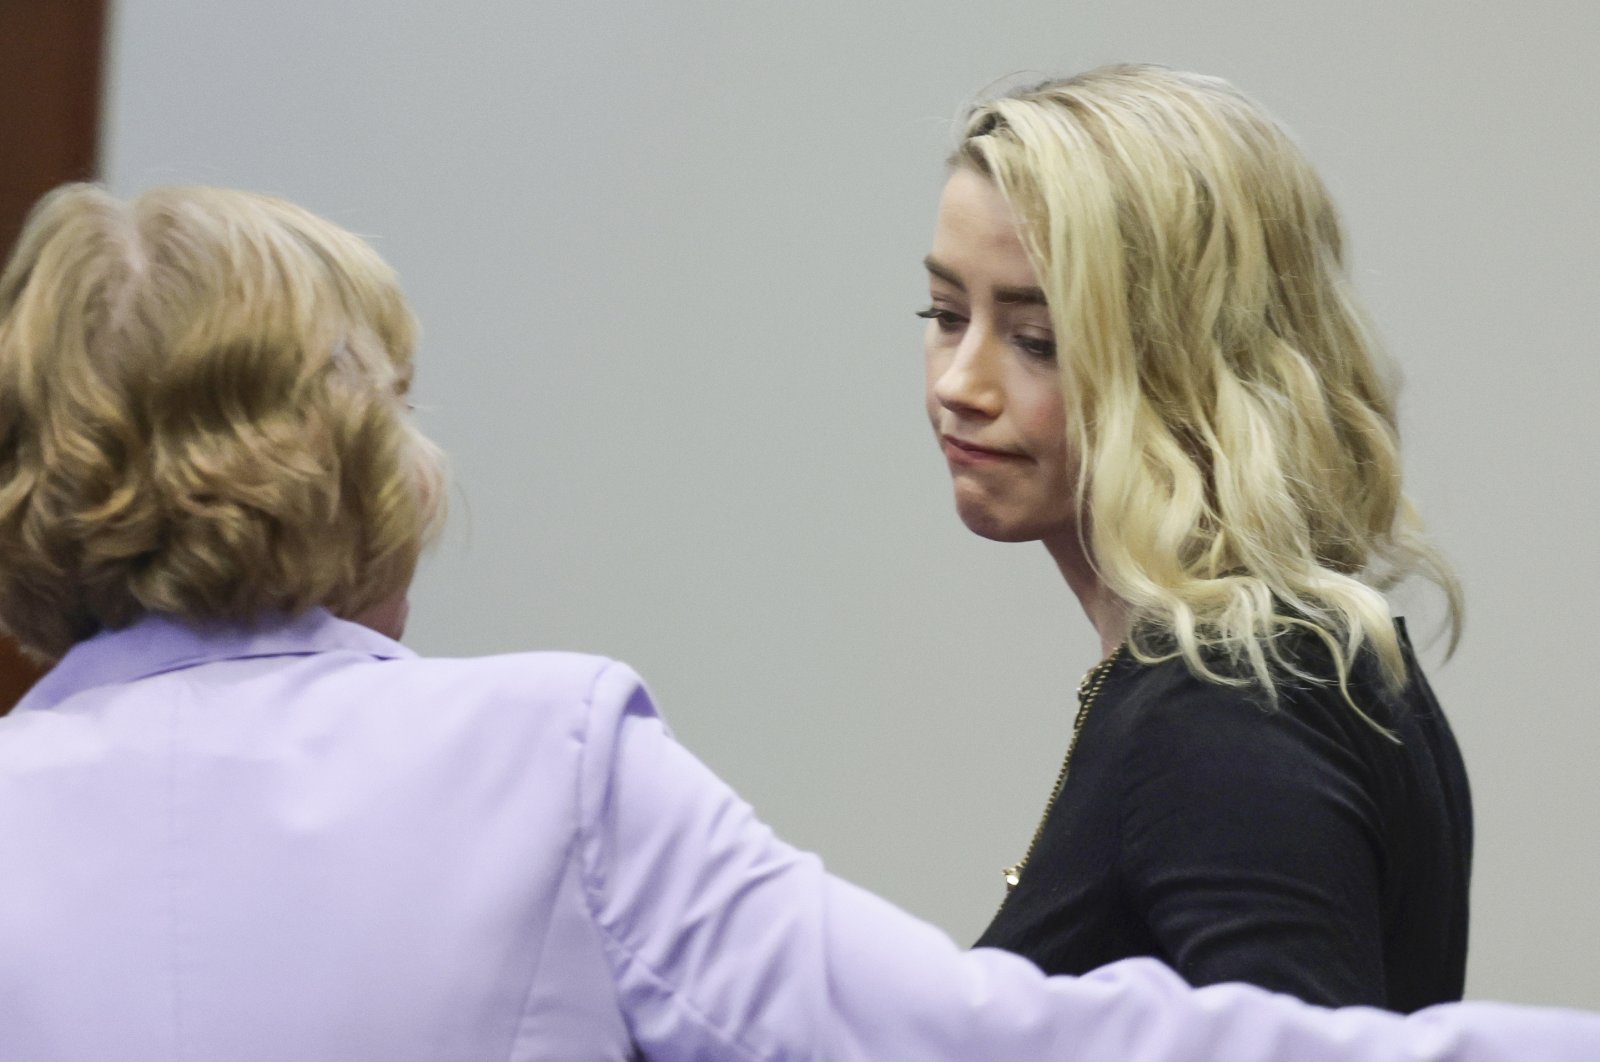 Actor Amber Heard reacts with her lawyer Elaine Bredehoft after the verdict was read at the Fairfax County Circuit Courthouse in Fairfax, Virgina, U.S., June 1, 2022. (AP Photo)